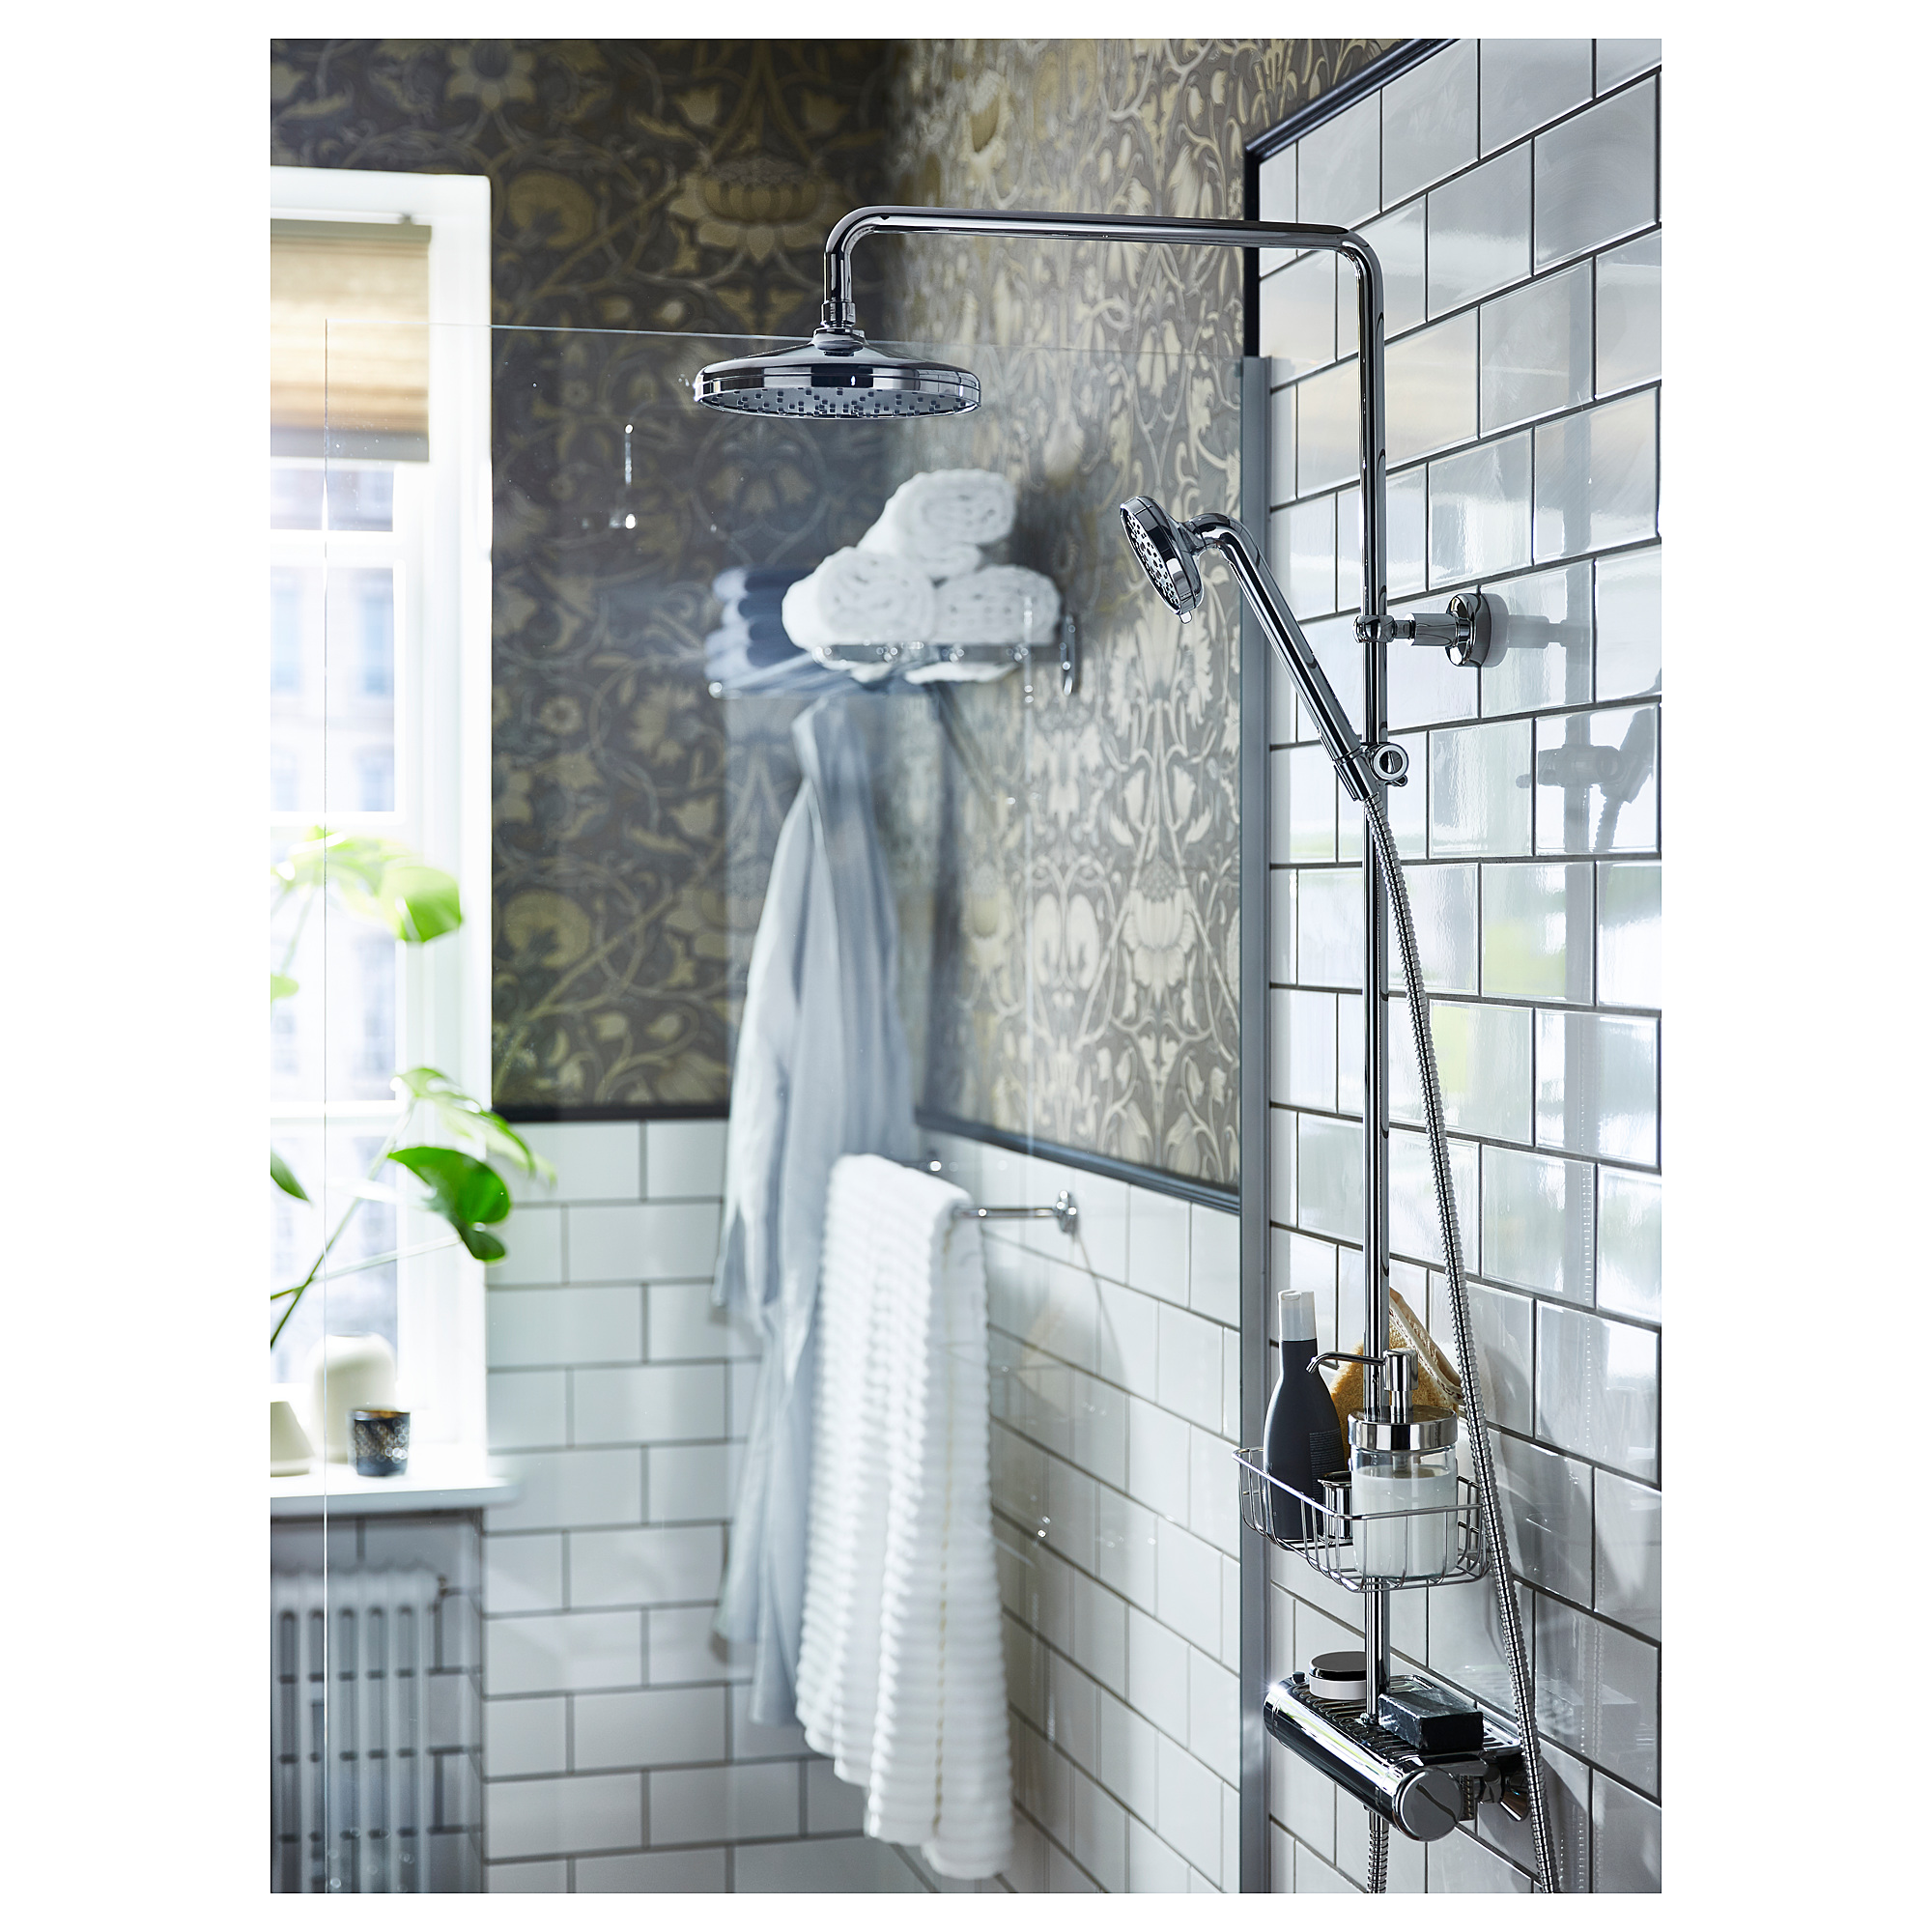 VOXNAN shower set with thermostatic mixer